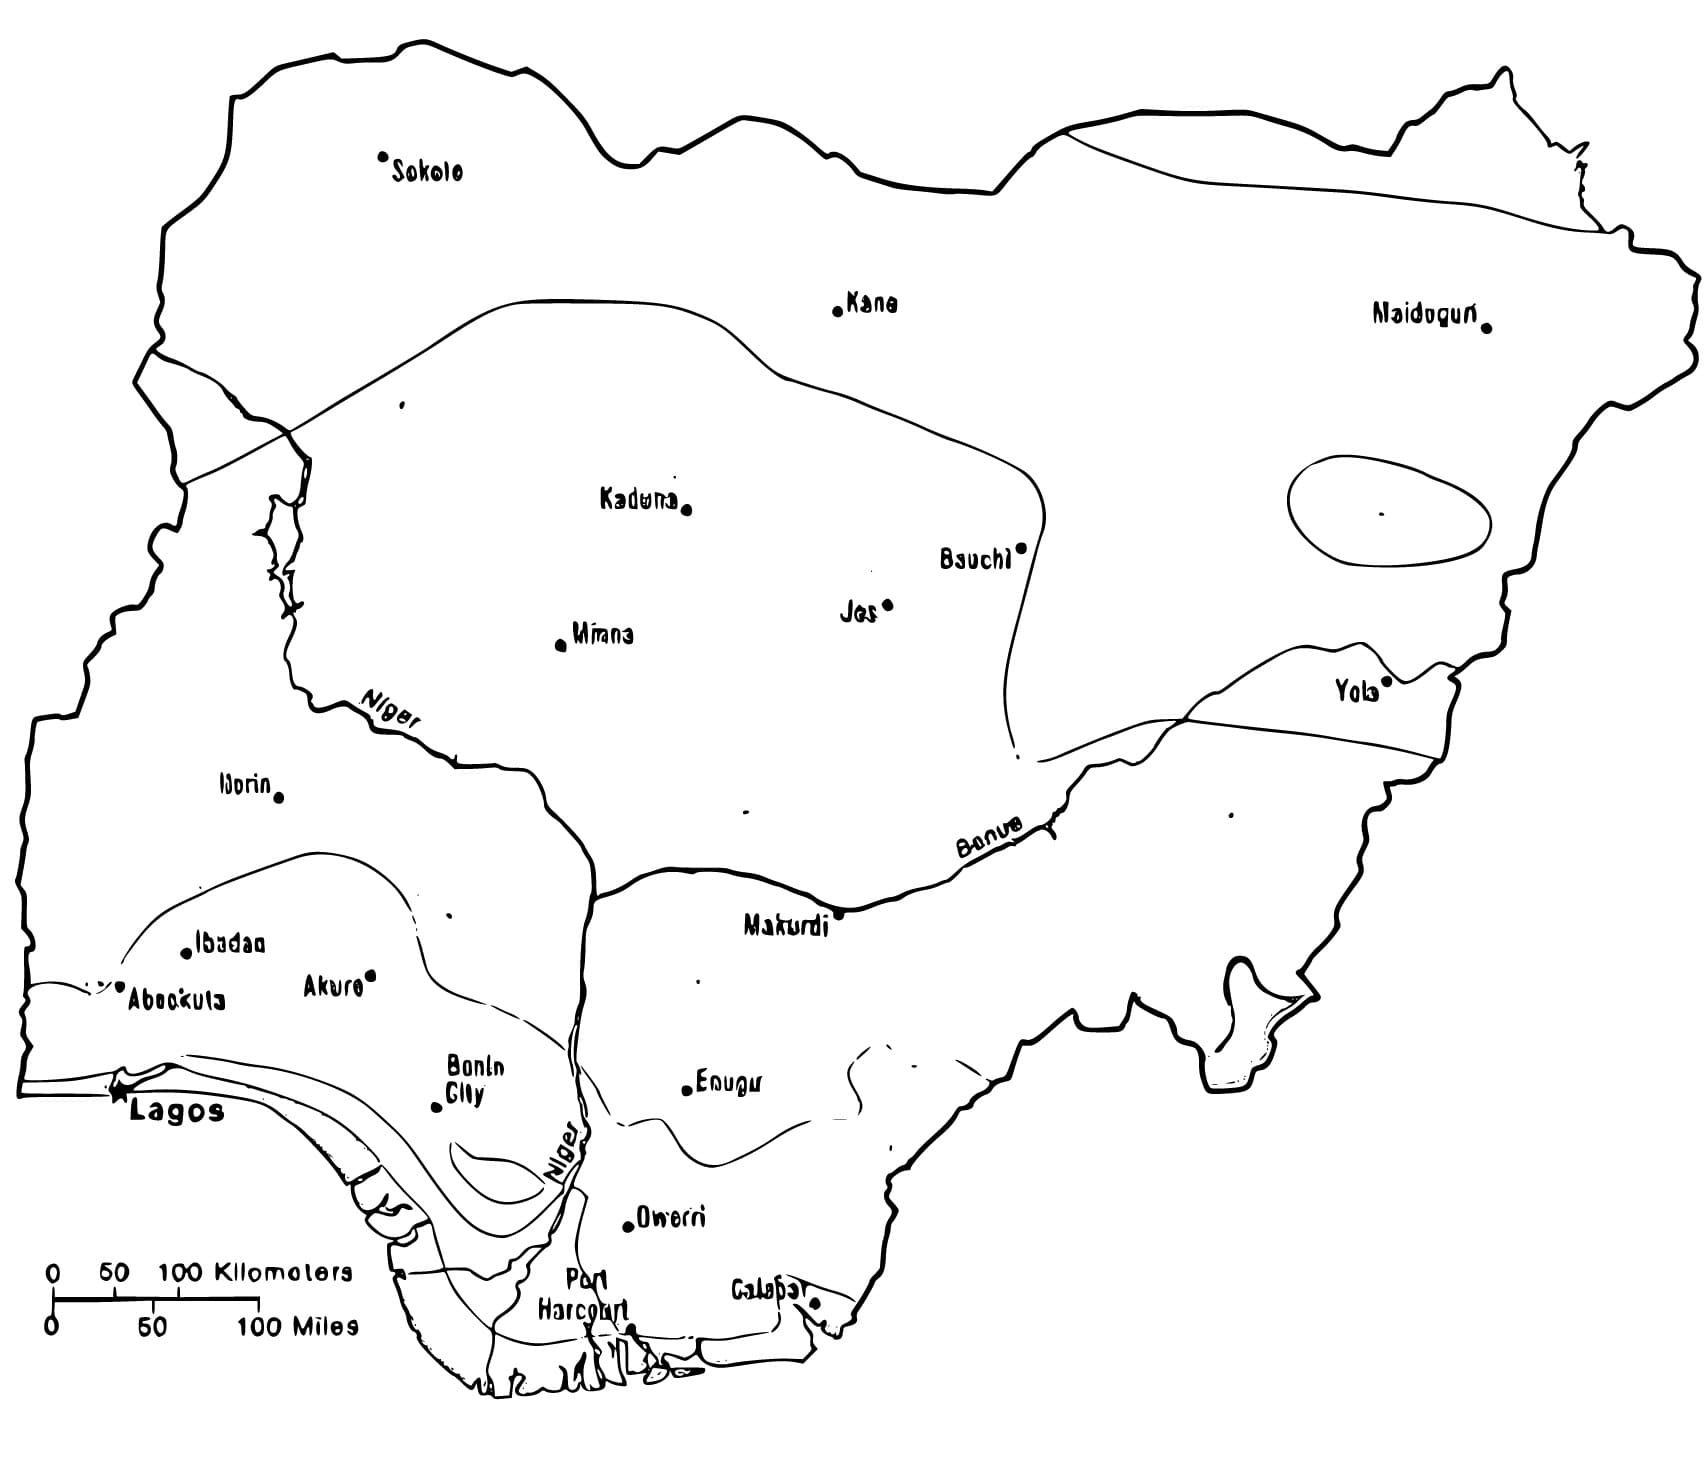 Nigeria coloring pages